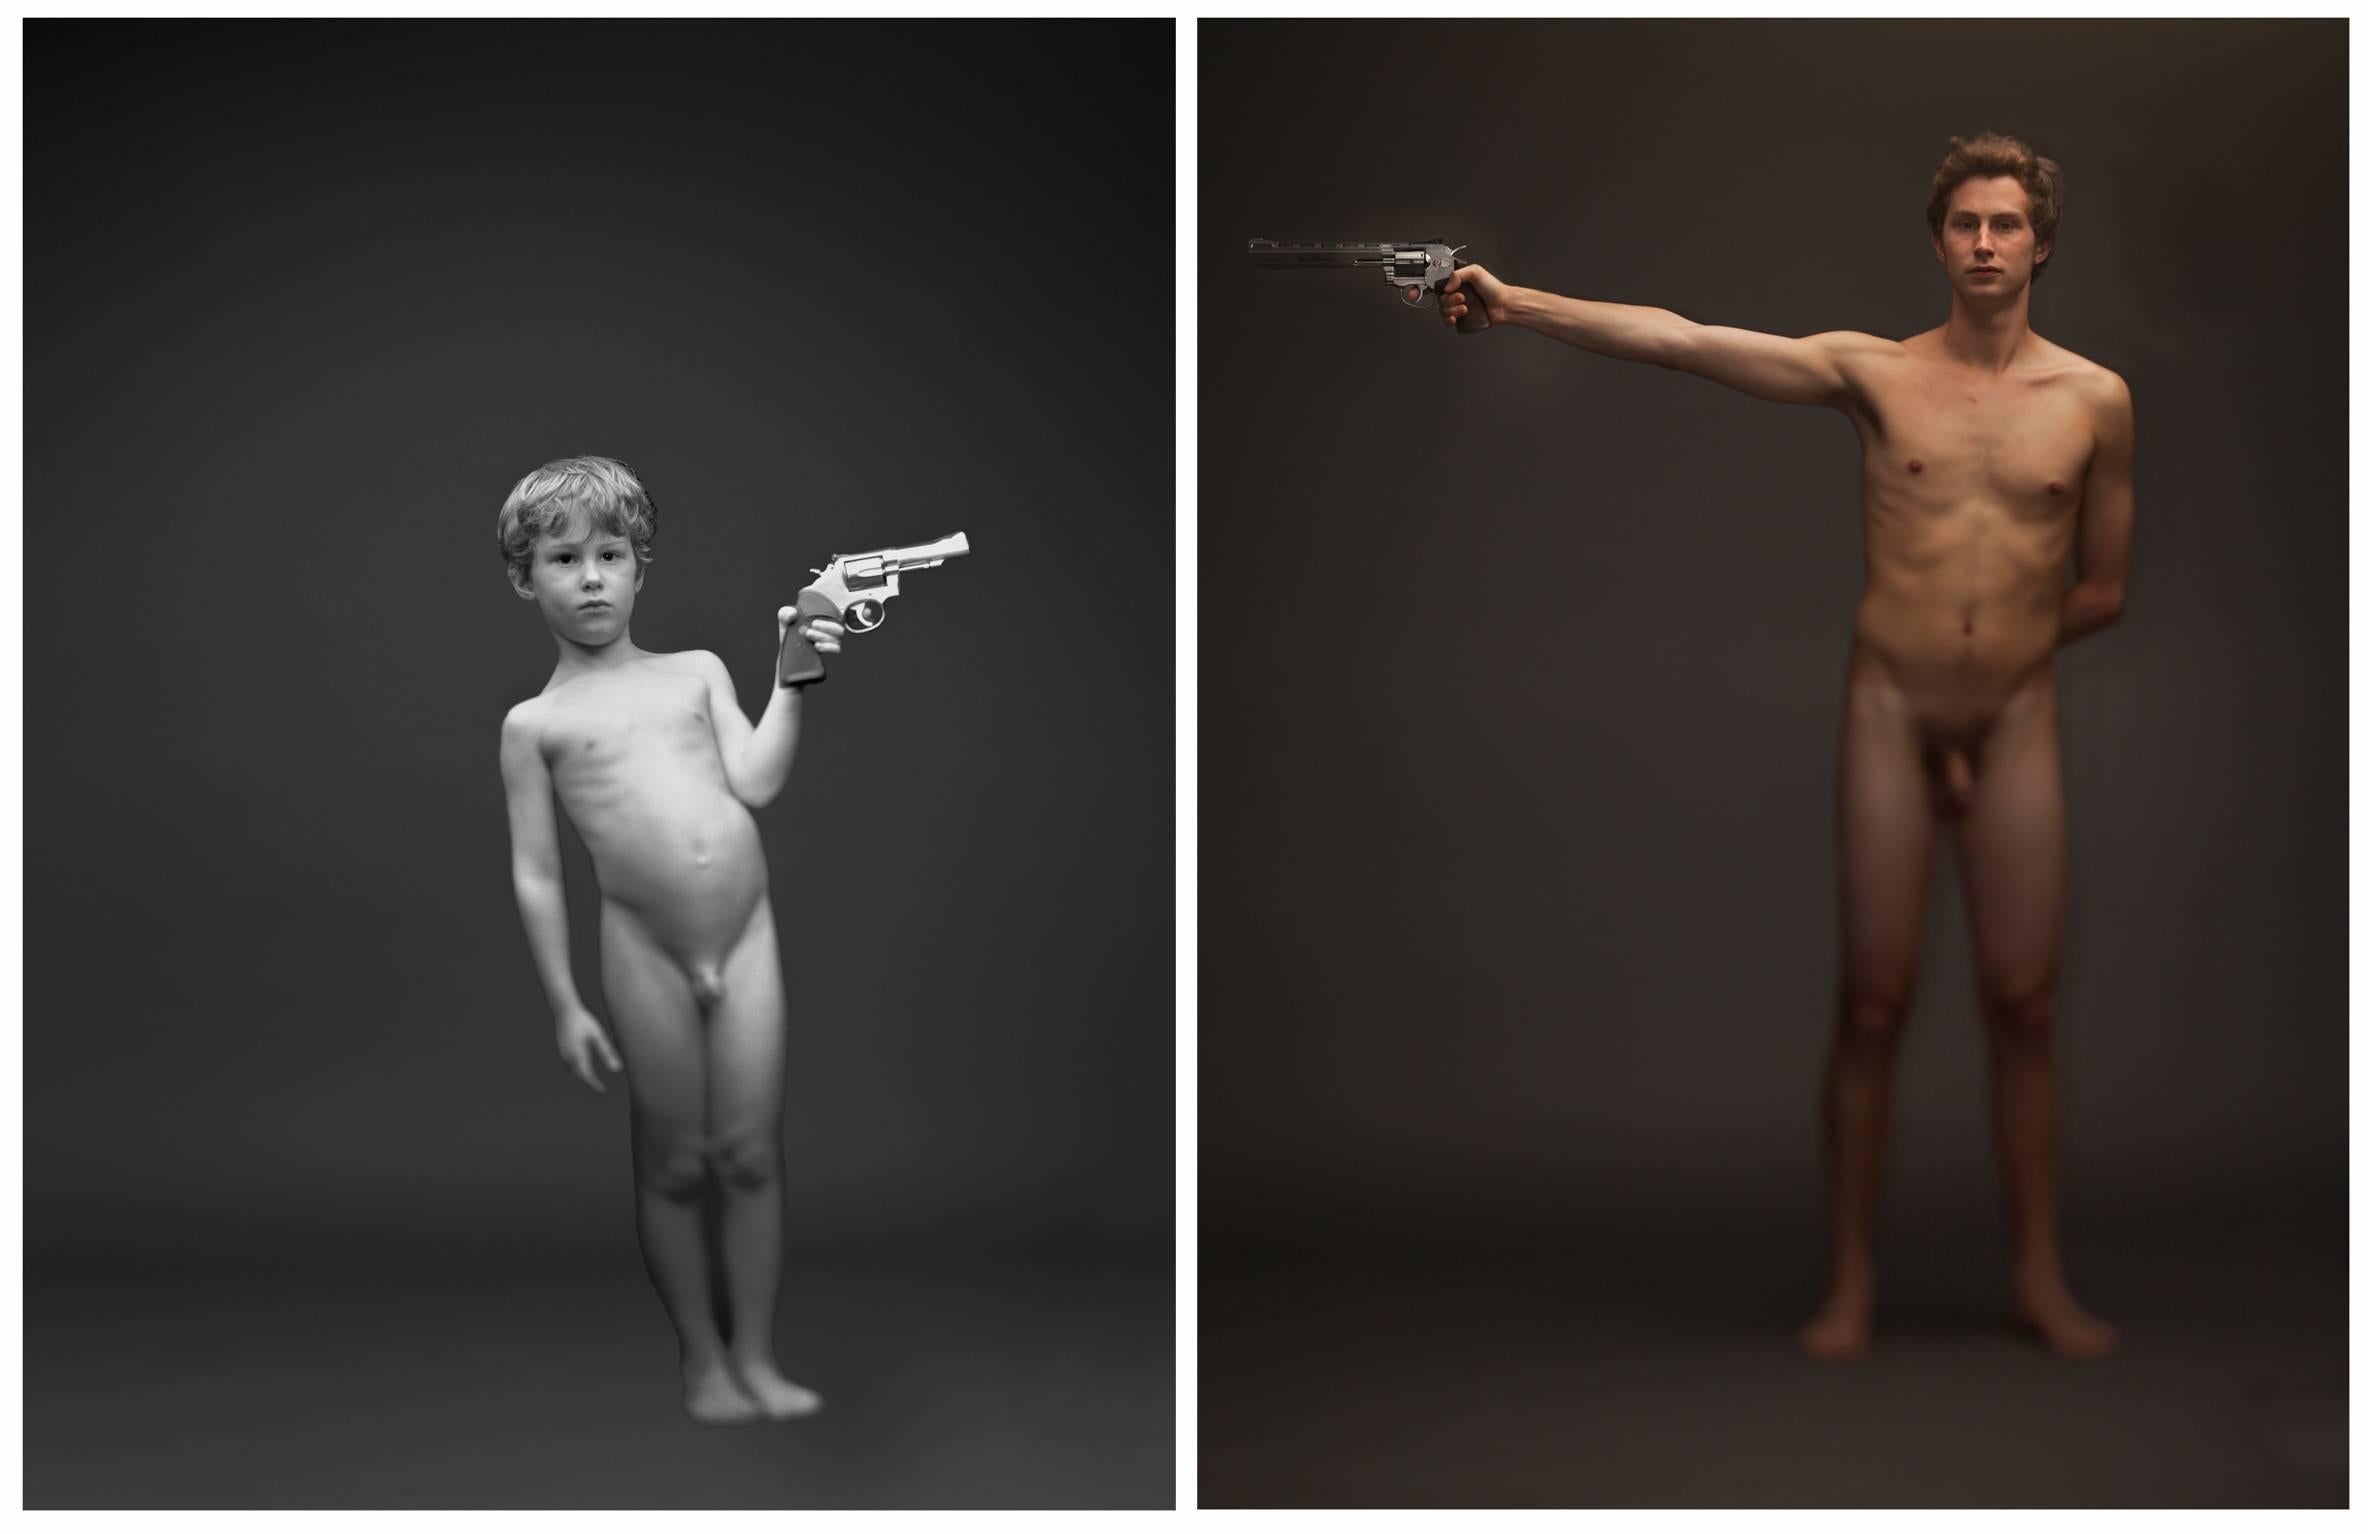 Growing up in a Gun Culture, My Son - Photograph by Neil Alexander